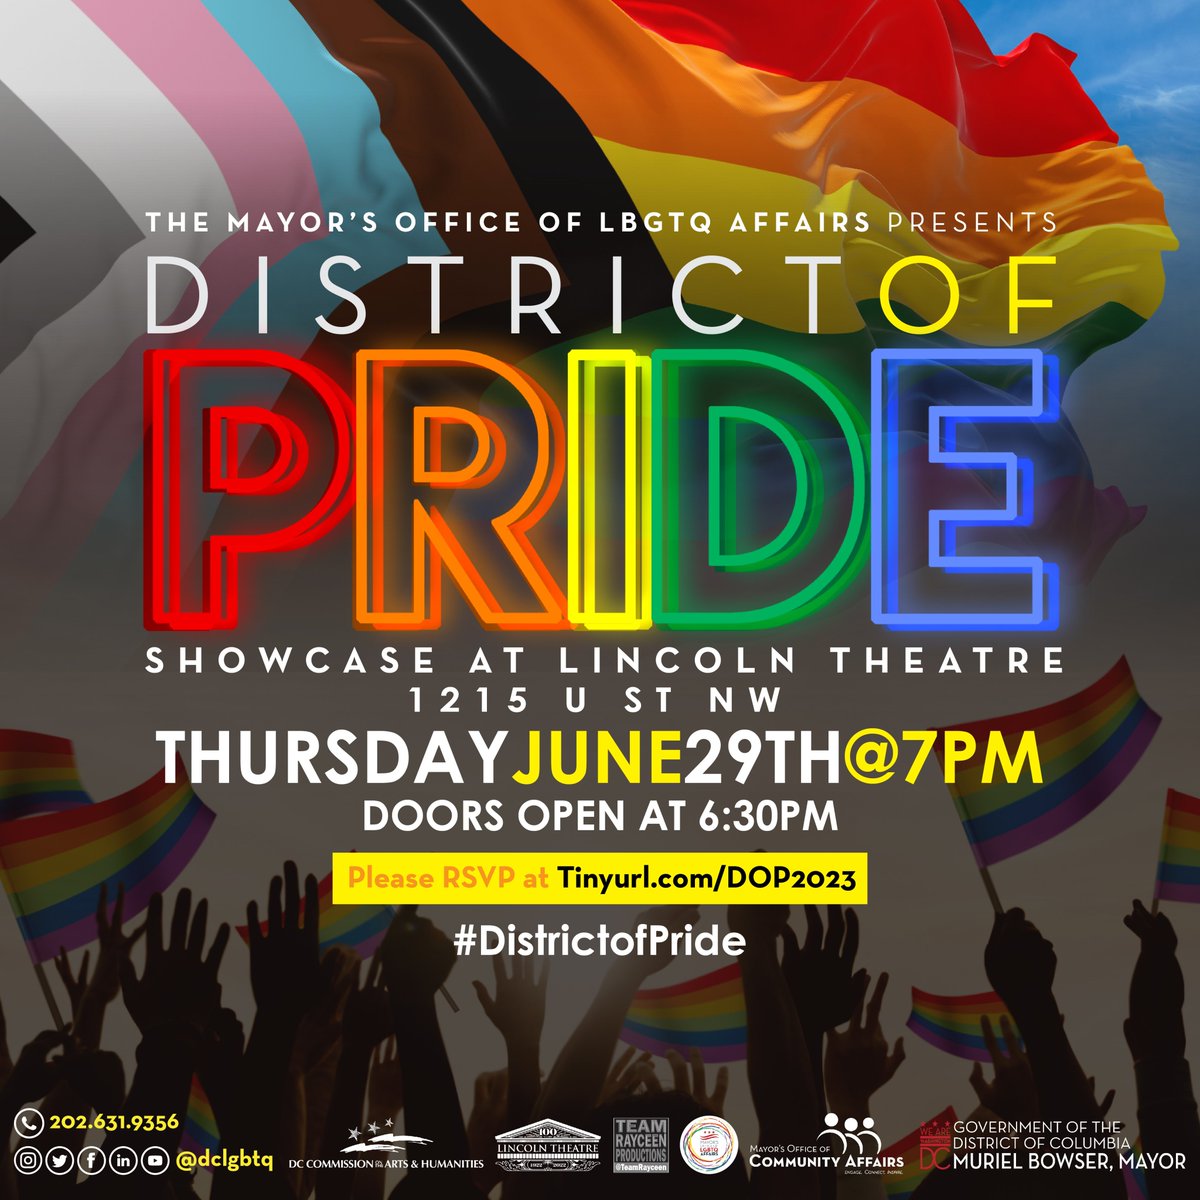 Join @DCLGBTQ and @TeamRayceen for #DistrictofPride in Washington, DC.
Venue: @TheLincolnDC on U Street NW
Date: June 29, 2023
Doors: 6:30pm
Program: 7pm
Featuring live music and more
#DOP2023 is free and open to the public!
RSVP: Rayceen.com